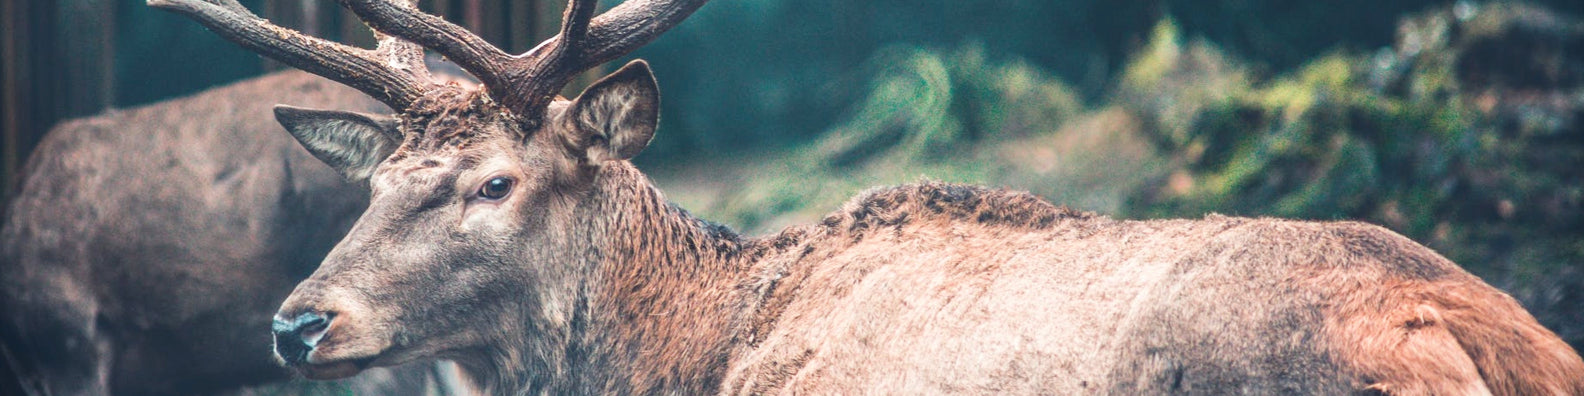 5 Reindeer Facts You Didn't Know